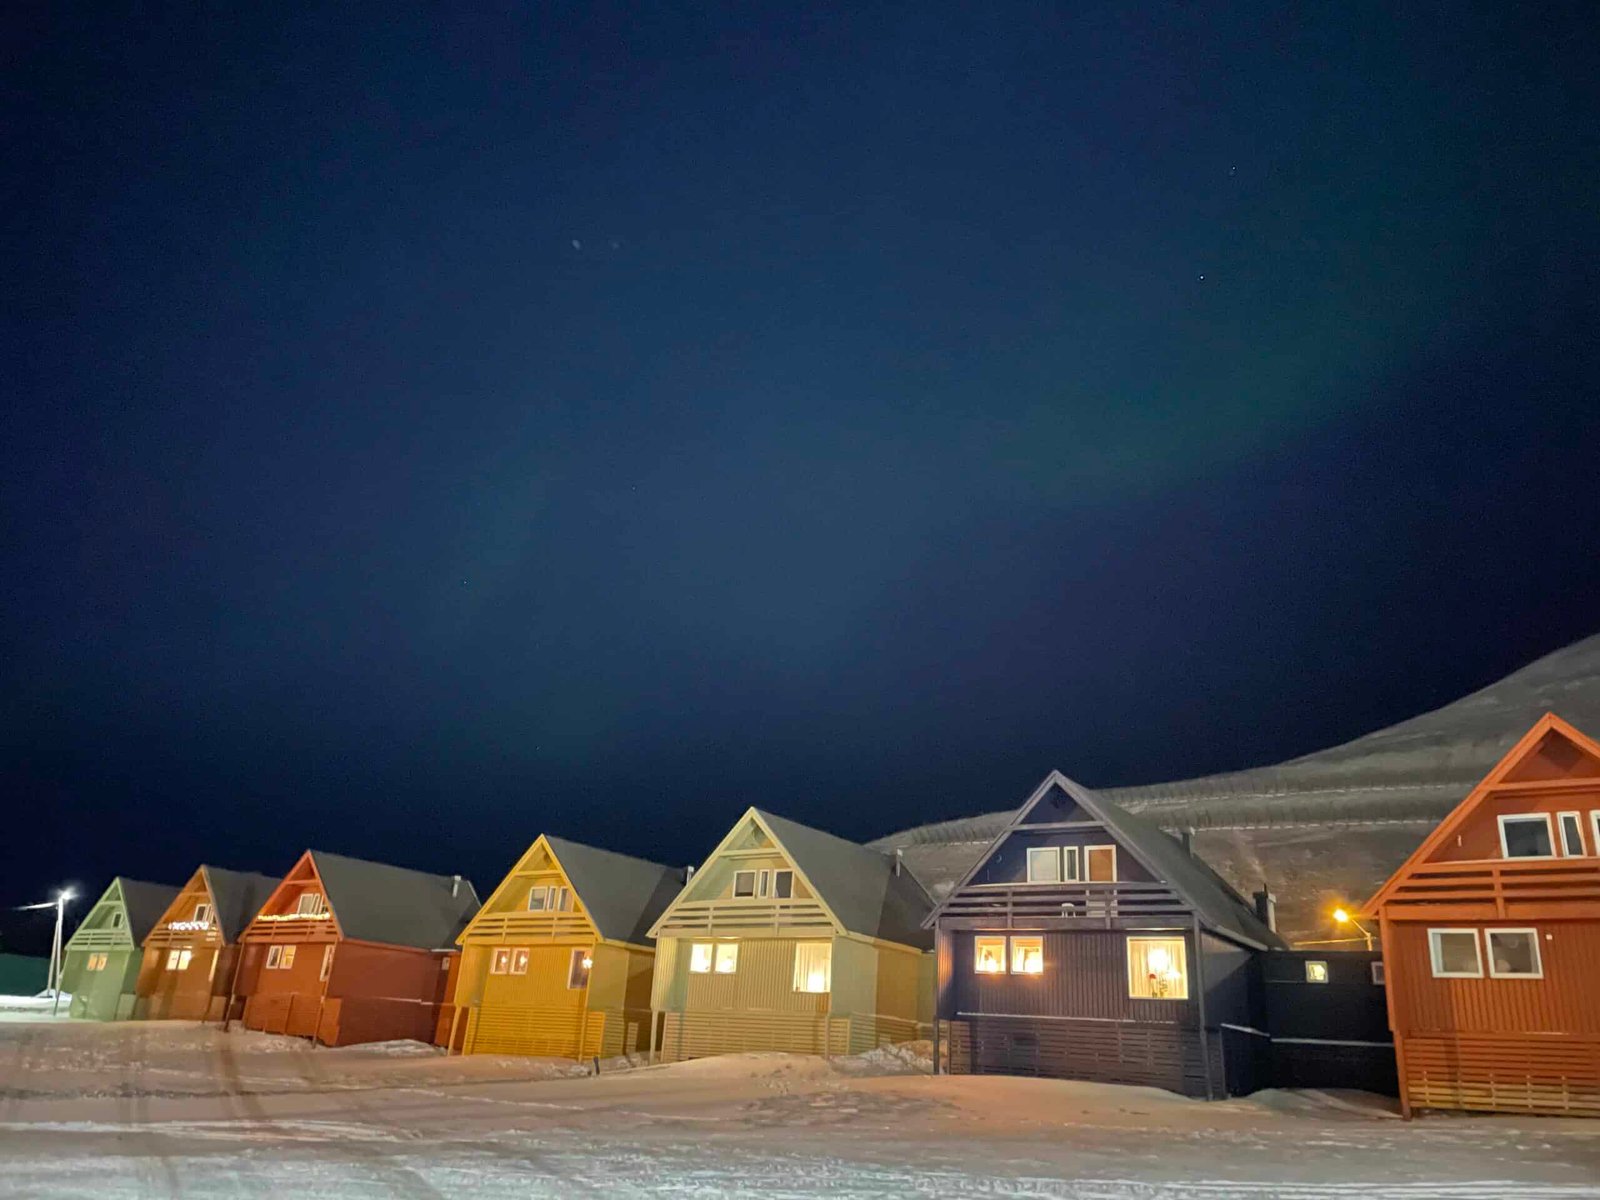 The famous colorful houses in Longyearbyen